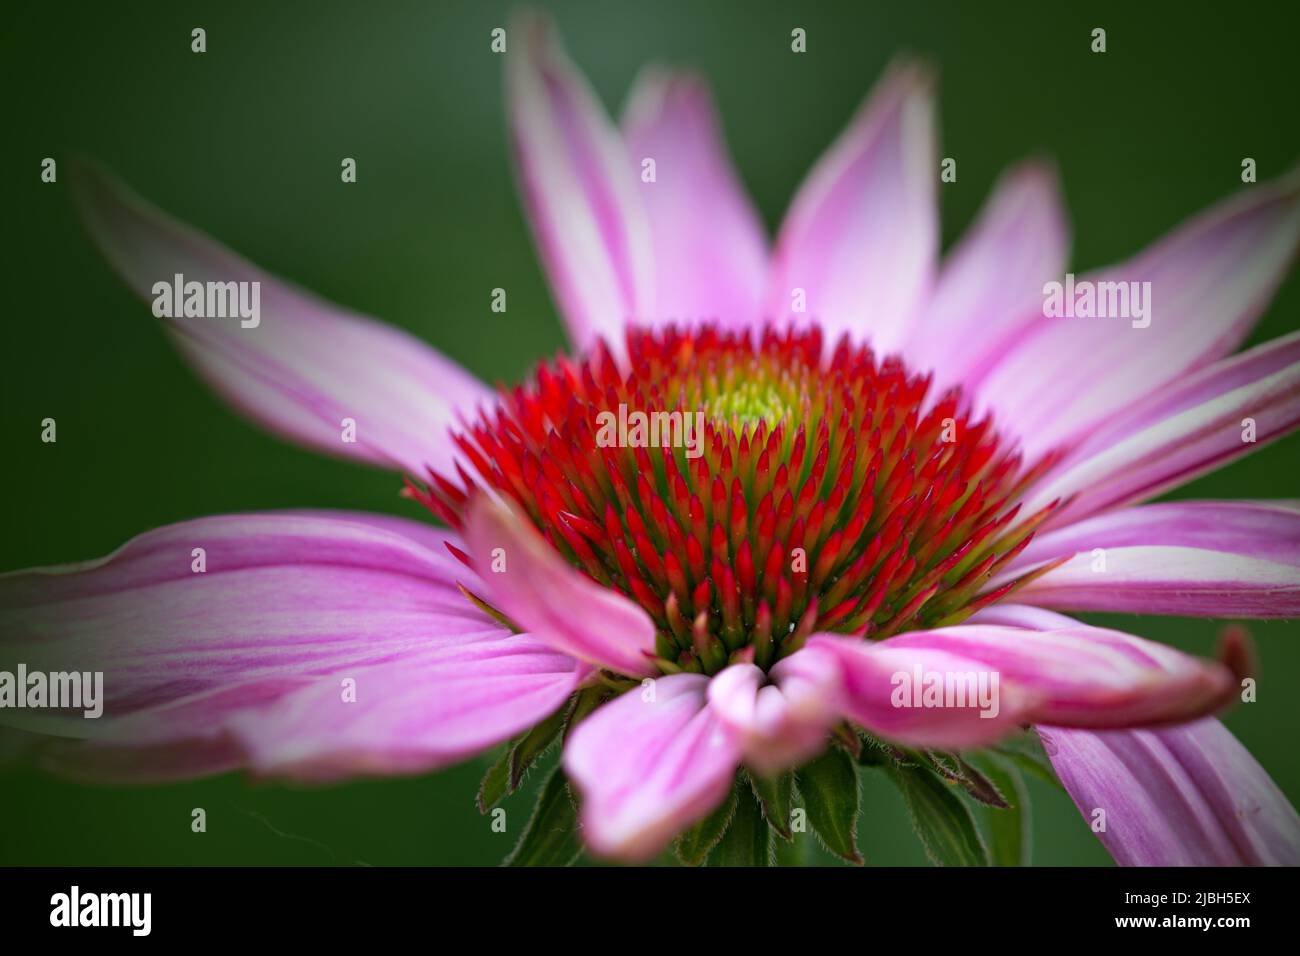 Photography of a colorful pink garden flower Stock Photo